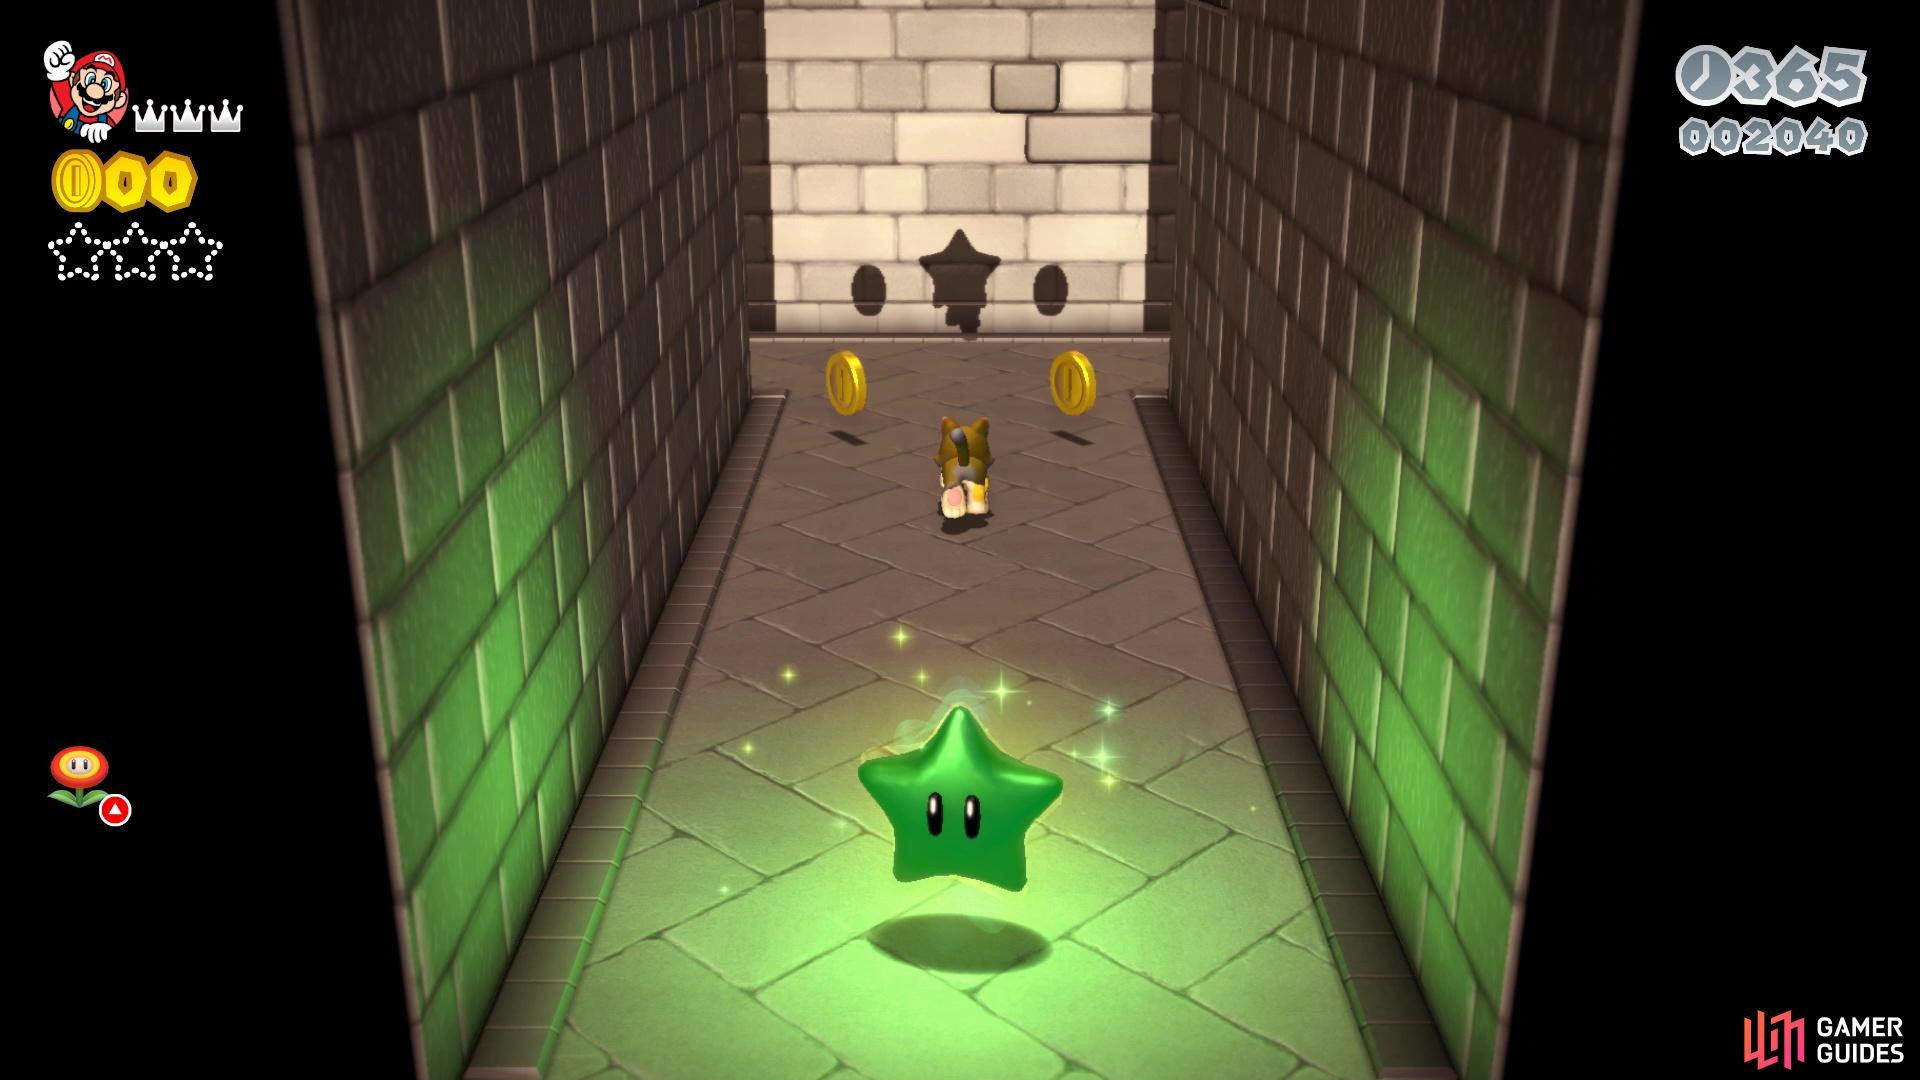 You can see the shadow of the first Green Star as you pass it